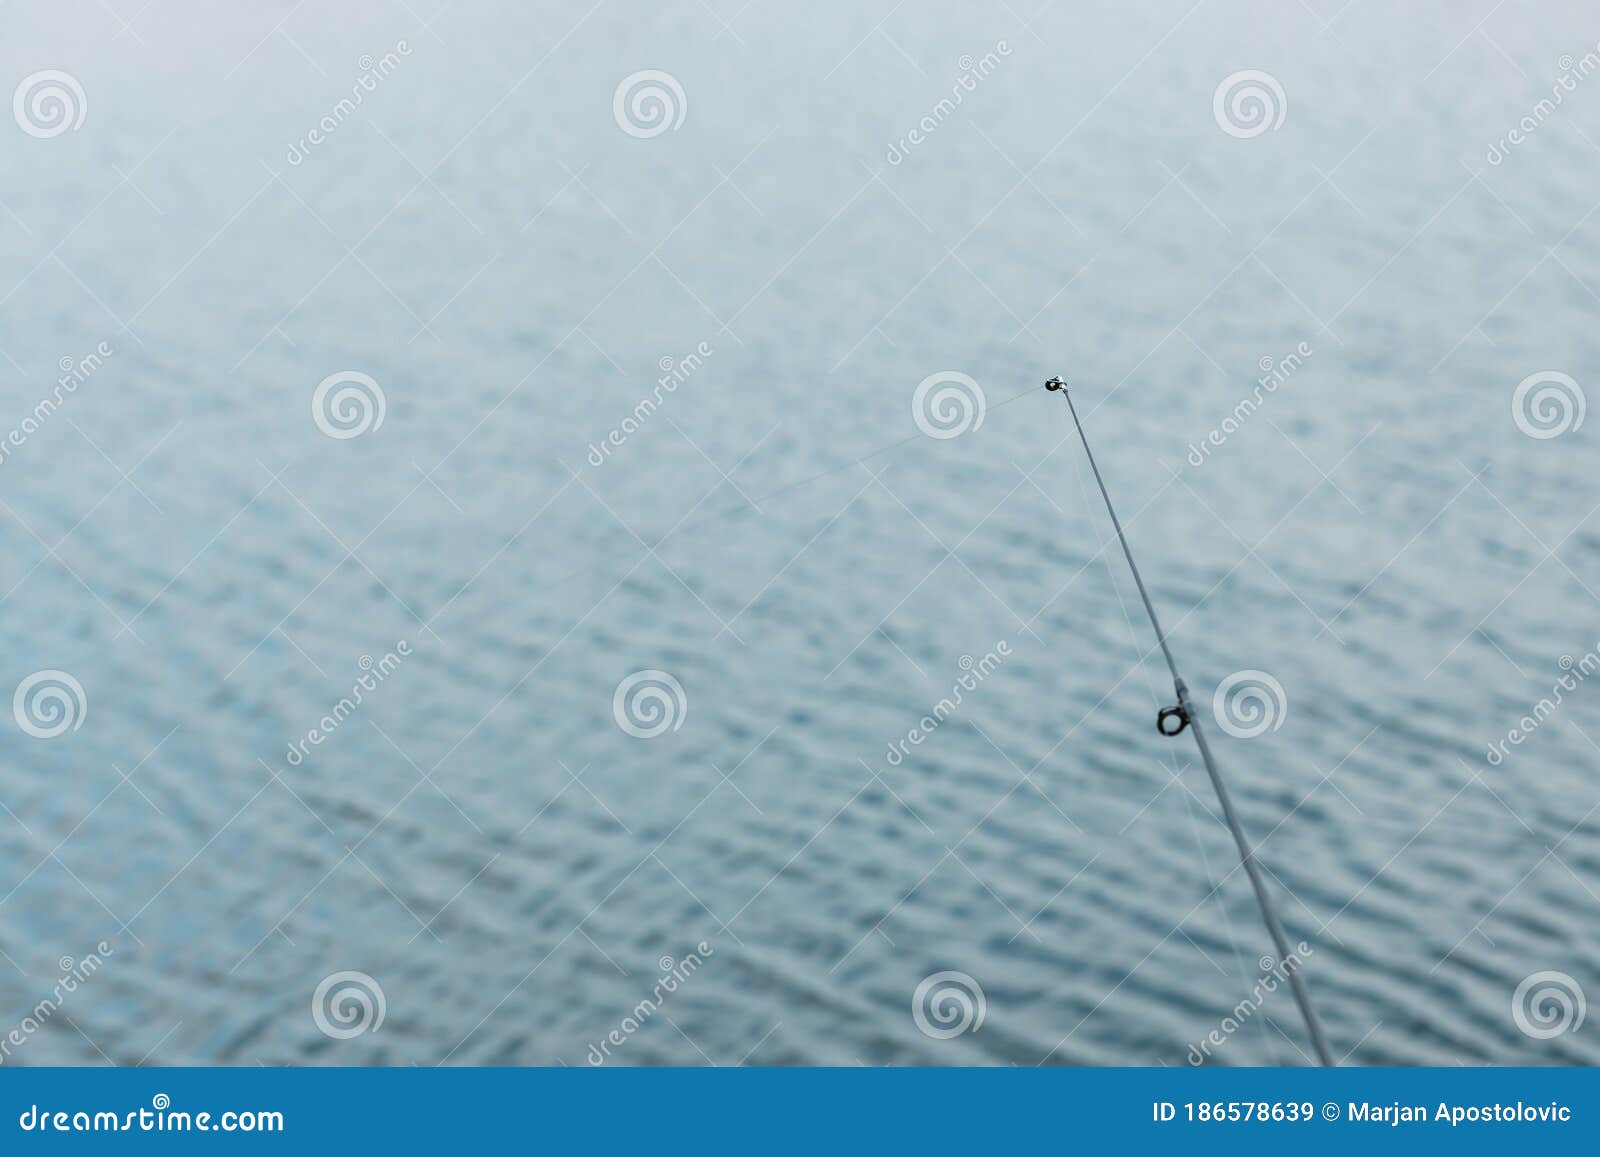 Fishing Pole and the String by the Water Stock Image - Image of